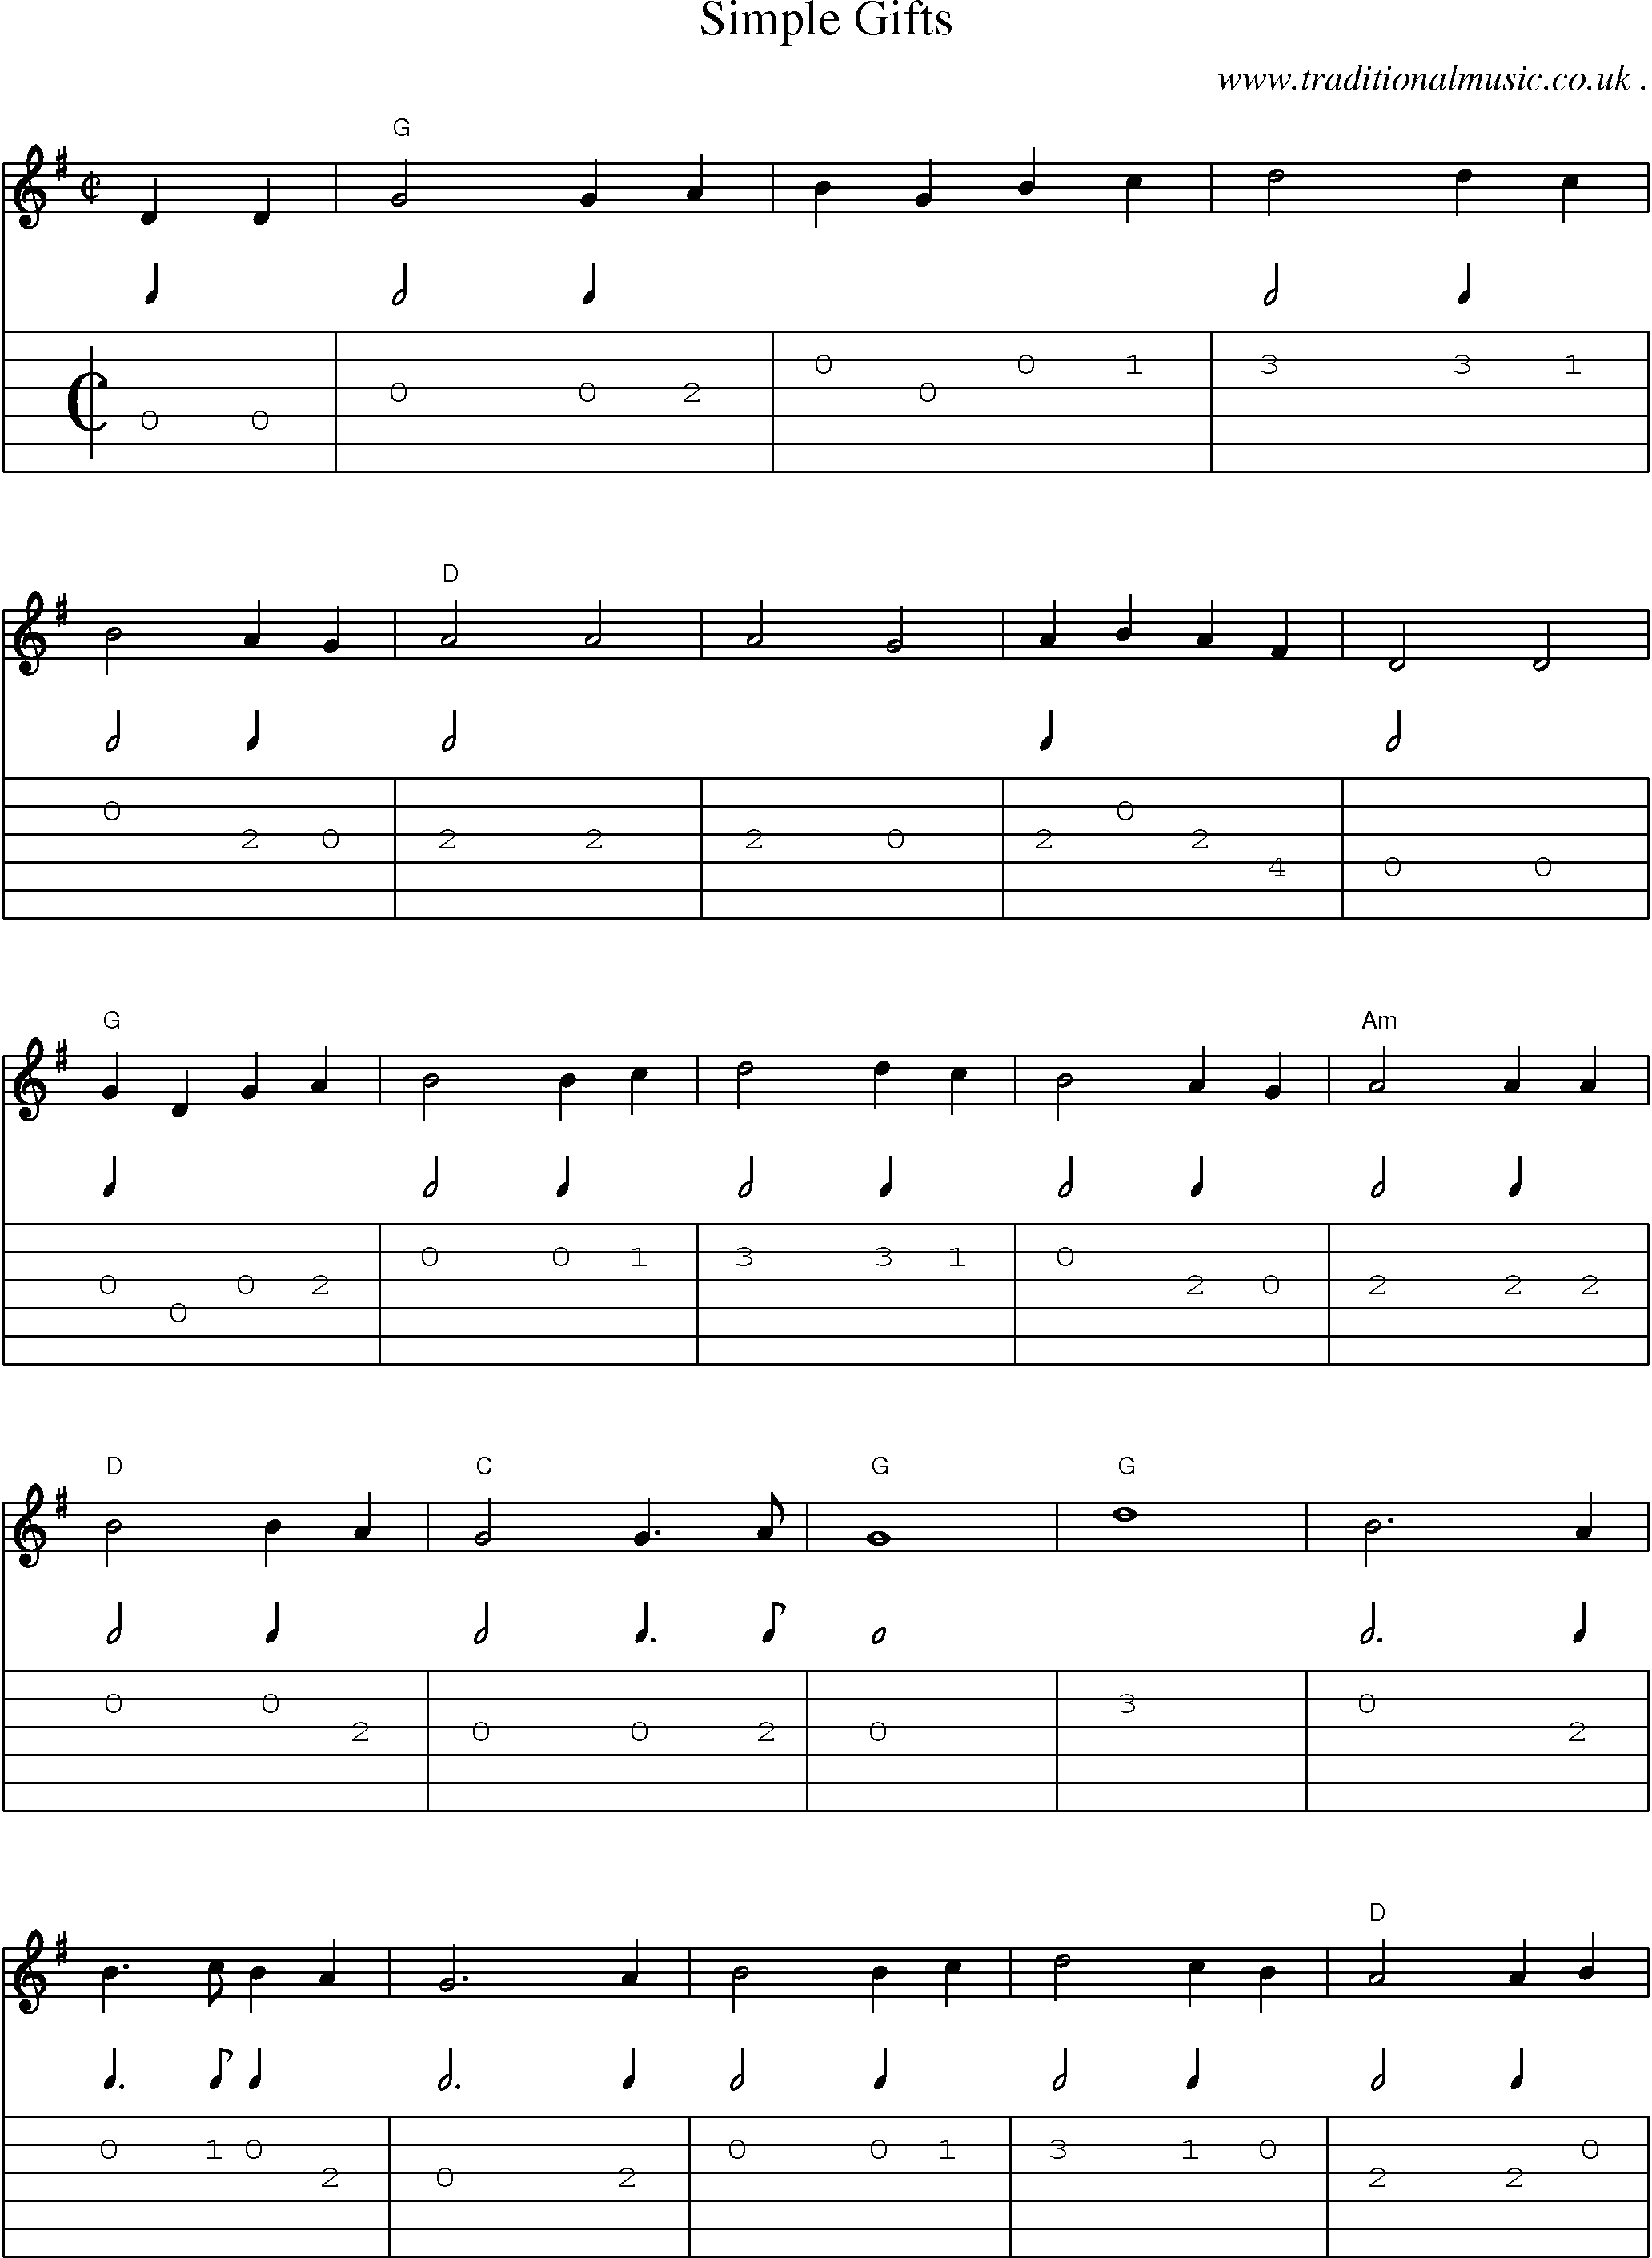 https://www.traditionalmusic.co.uk/session-guitar-tab/png/simple_gifts.png